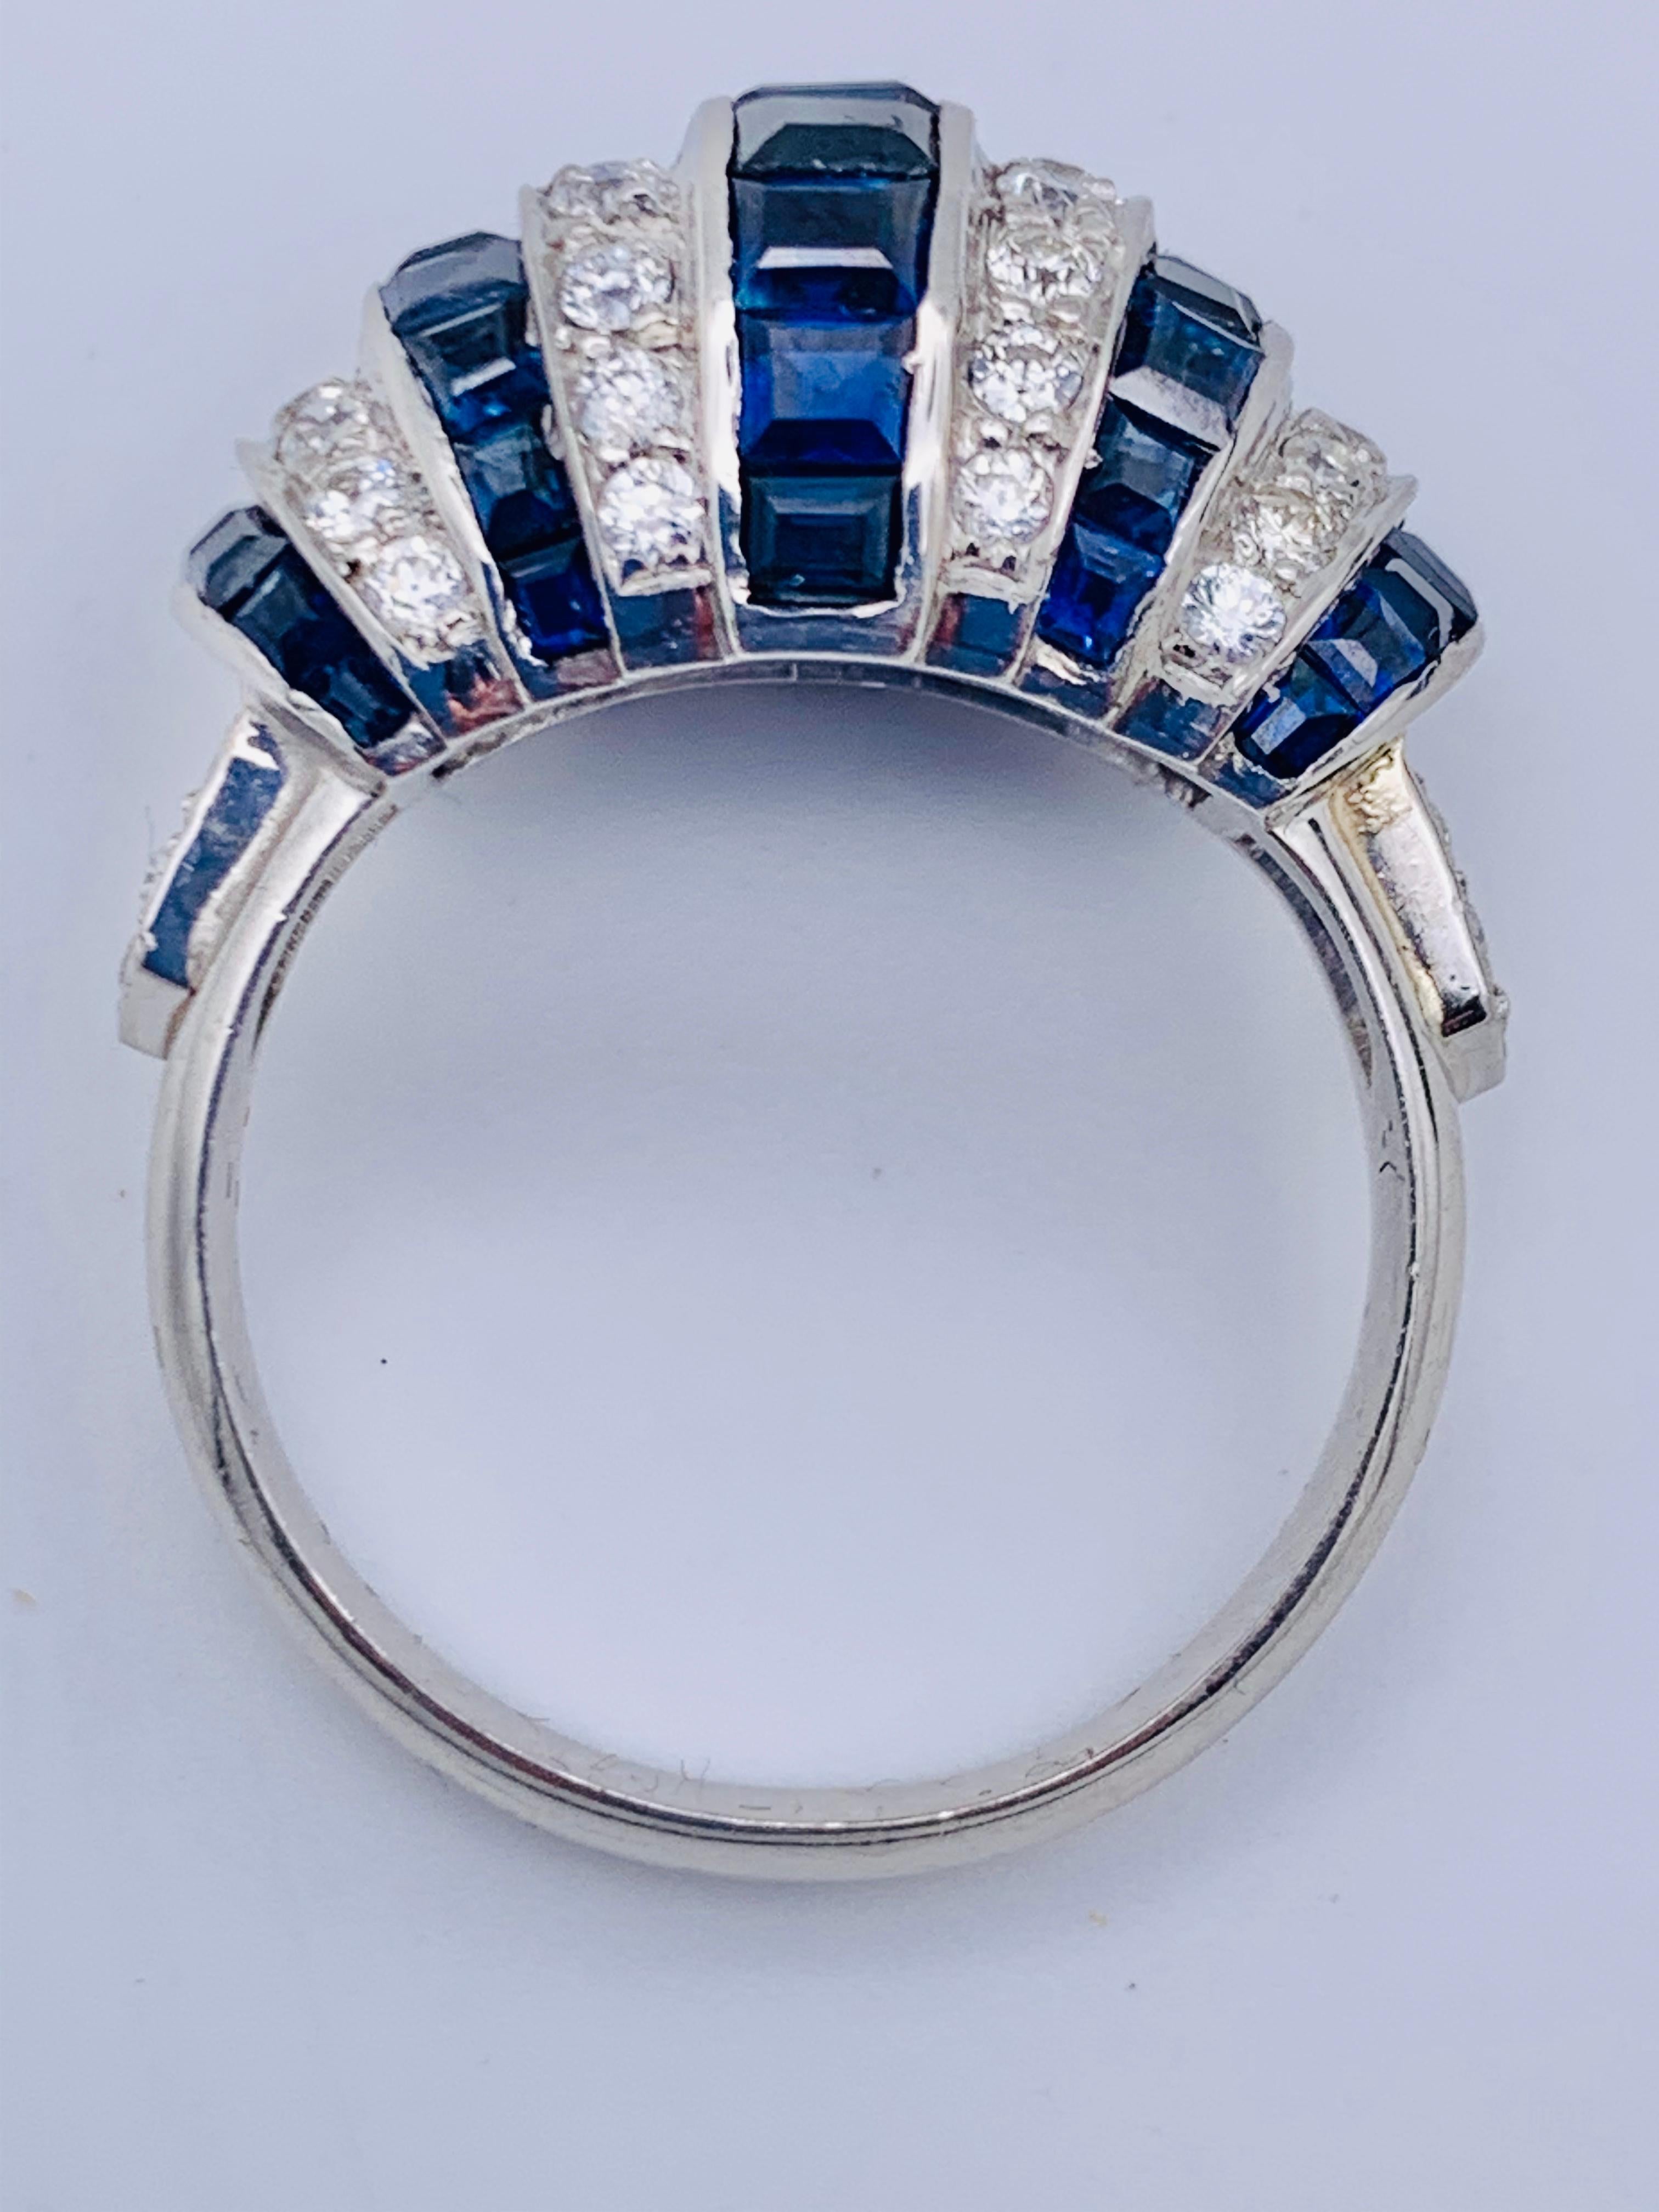 Very chique Art Deco style domed bombé ring with five rows of calibré cut sapphires alternating with 4 rows of brilliant cut diamonds.The ring sholders are decorated with five small dimonds each.
The ring holds 42 diamonds with a total weight of